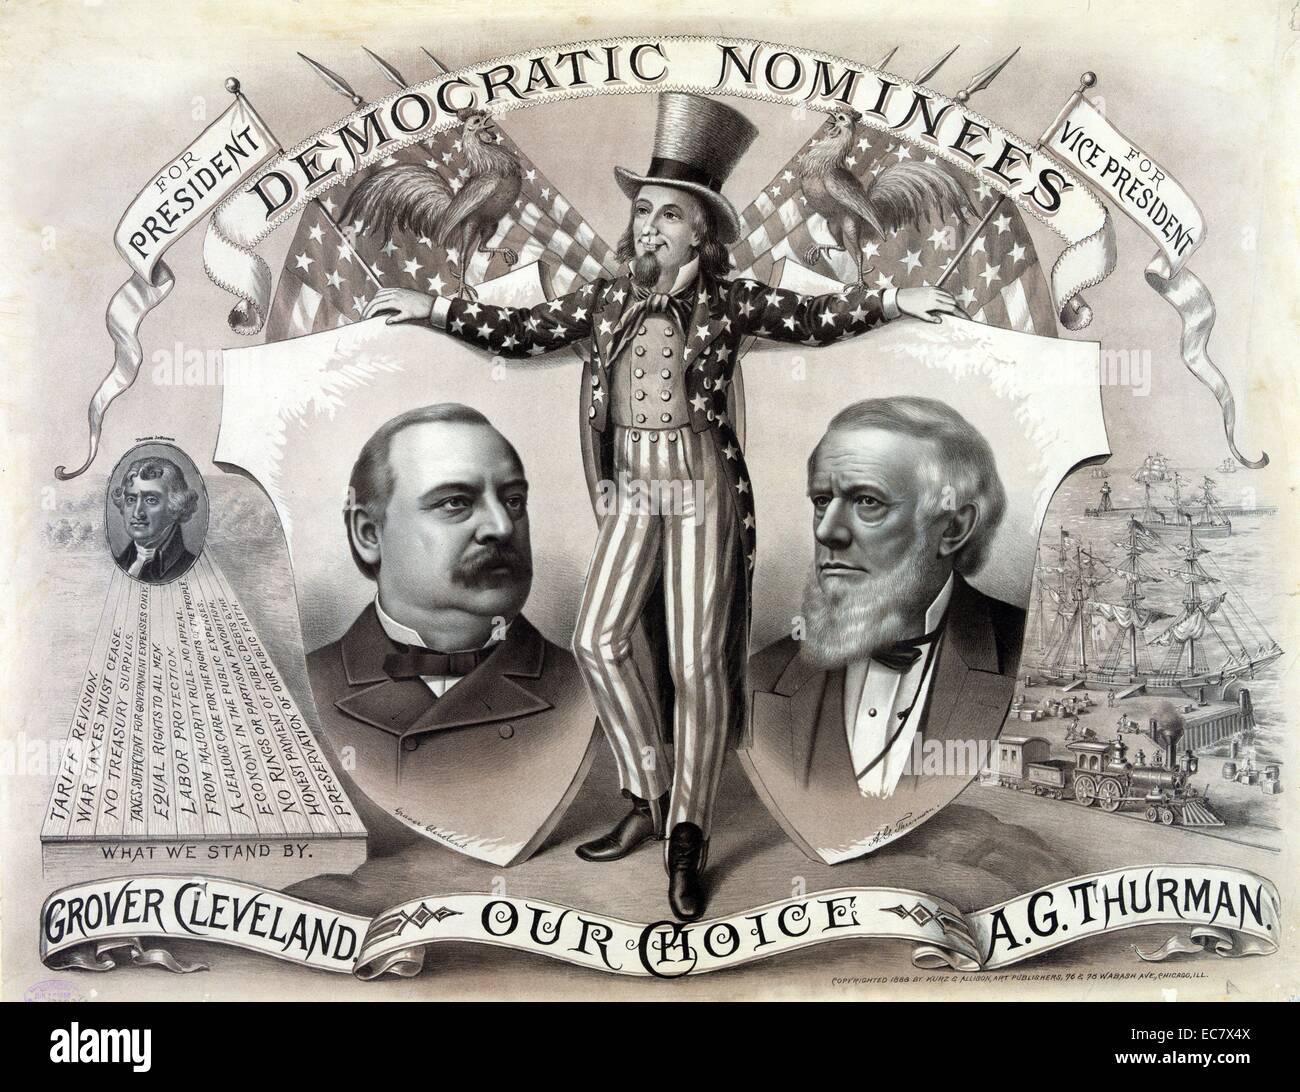 Our choice, Grover Cleveland, A.G. Thurman. Democratic nominees, for president [and] for vice president' Uncle Sam standing with large shields on which are portraits of Grover Cleveland and Allen G. Thurman. Includes Democratic party platform, a cameo portrait of Thomas Jefferson, a dock scene with ship and railroad, and roosters--a symbol of the Democratic party before the donkey. Stock Photo